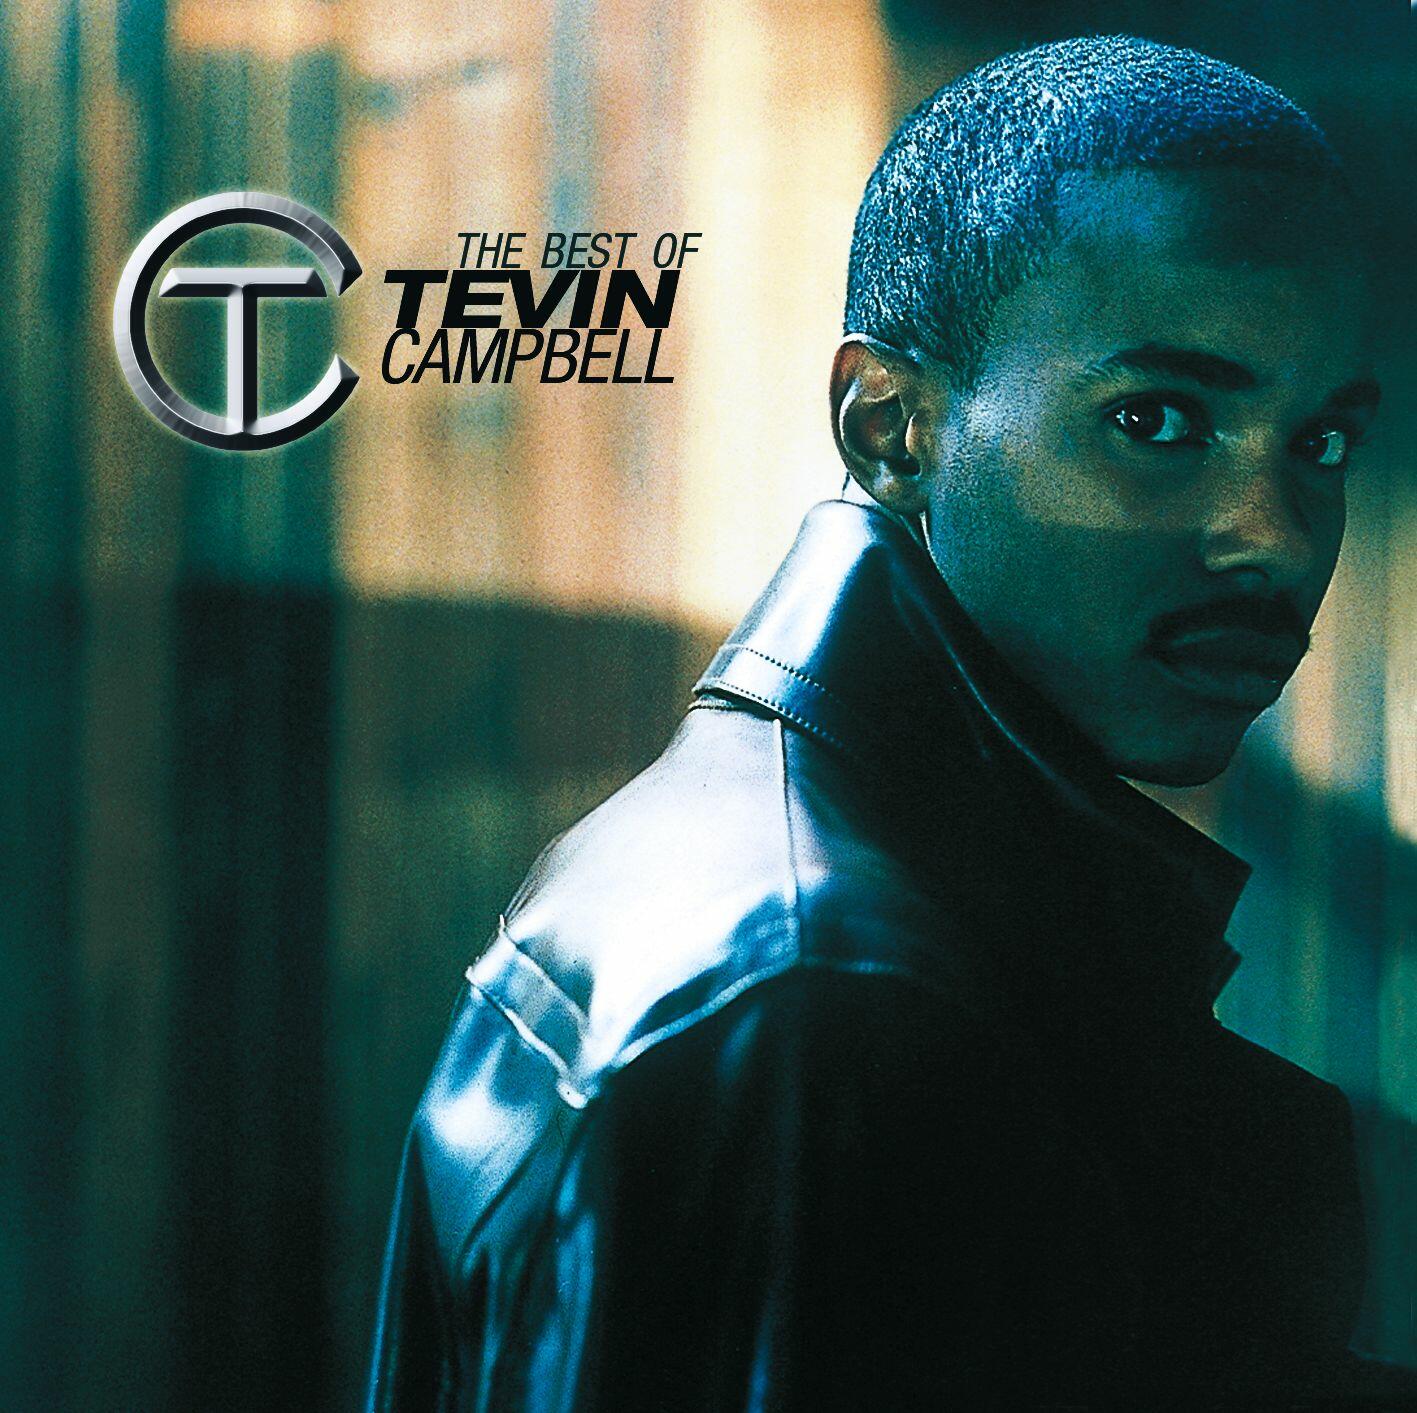 Listen Free to Tevin Campbell - The Best Of Tevin Campbell Radio on iHeartRadio ...1417 x 1413